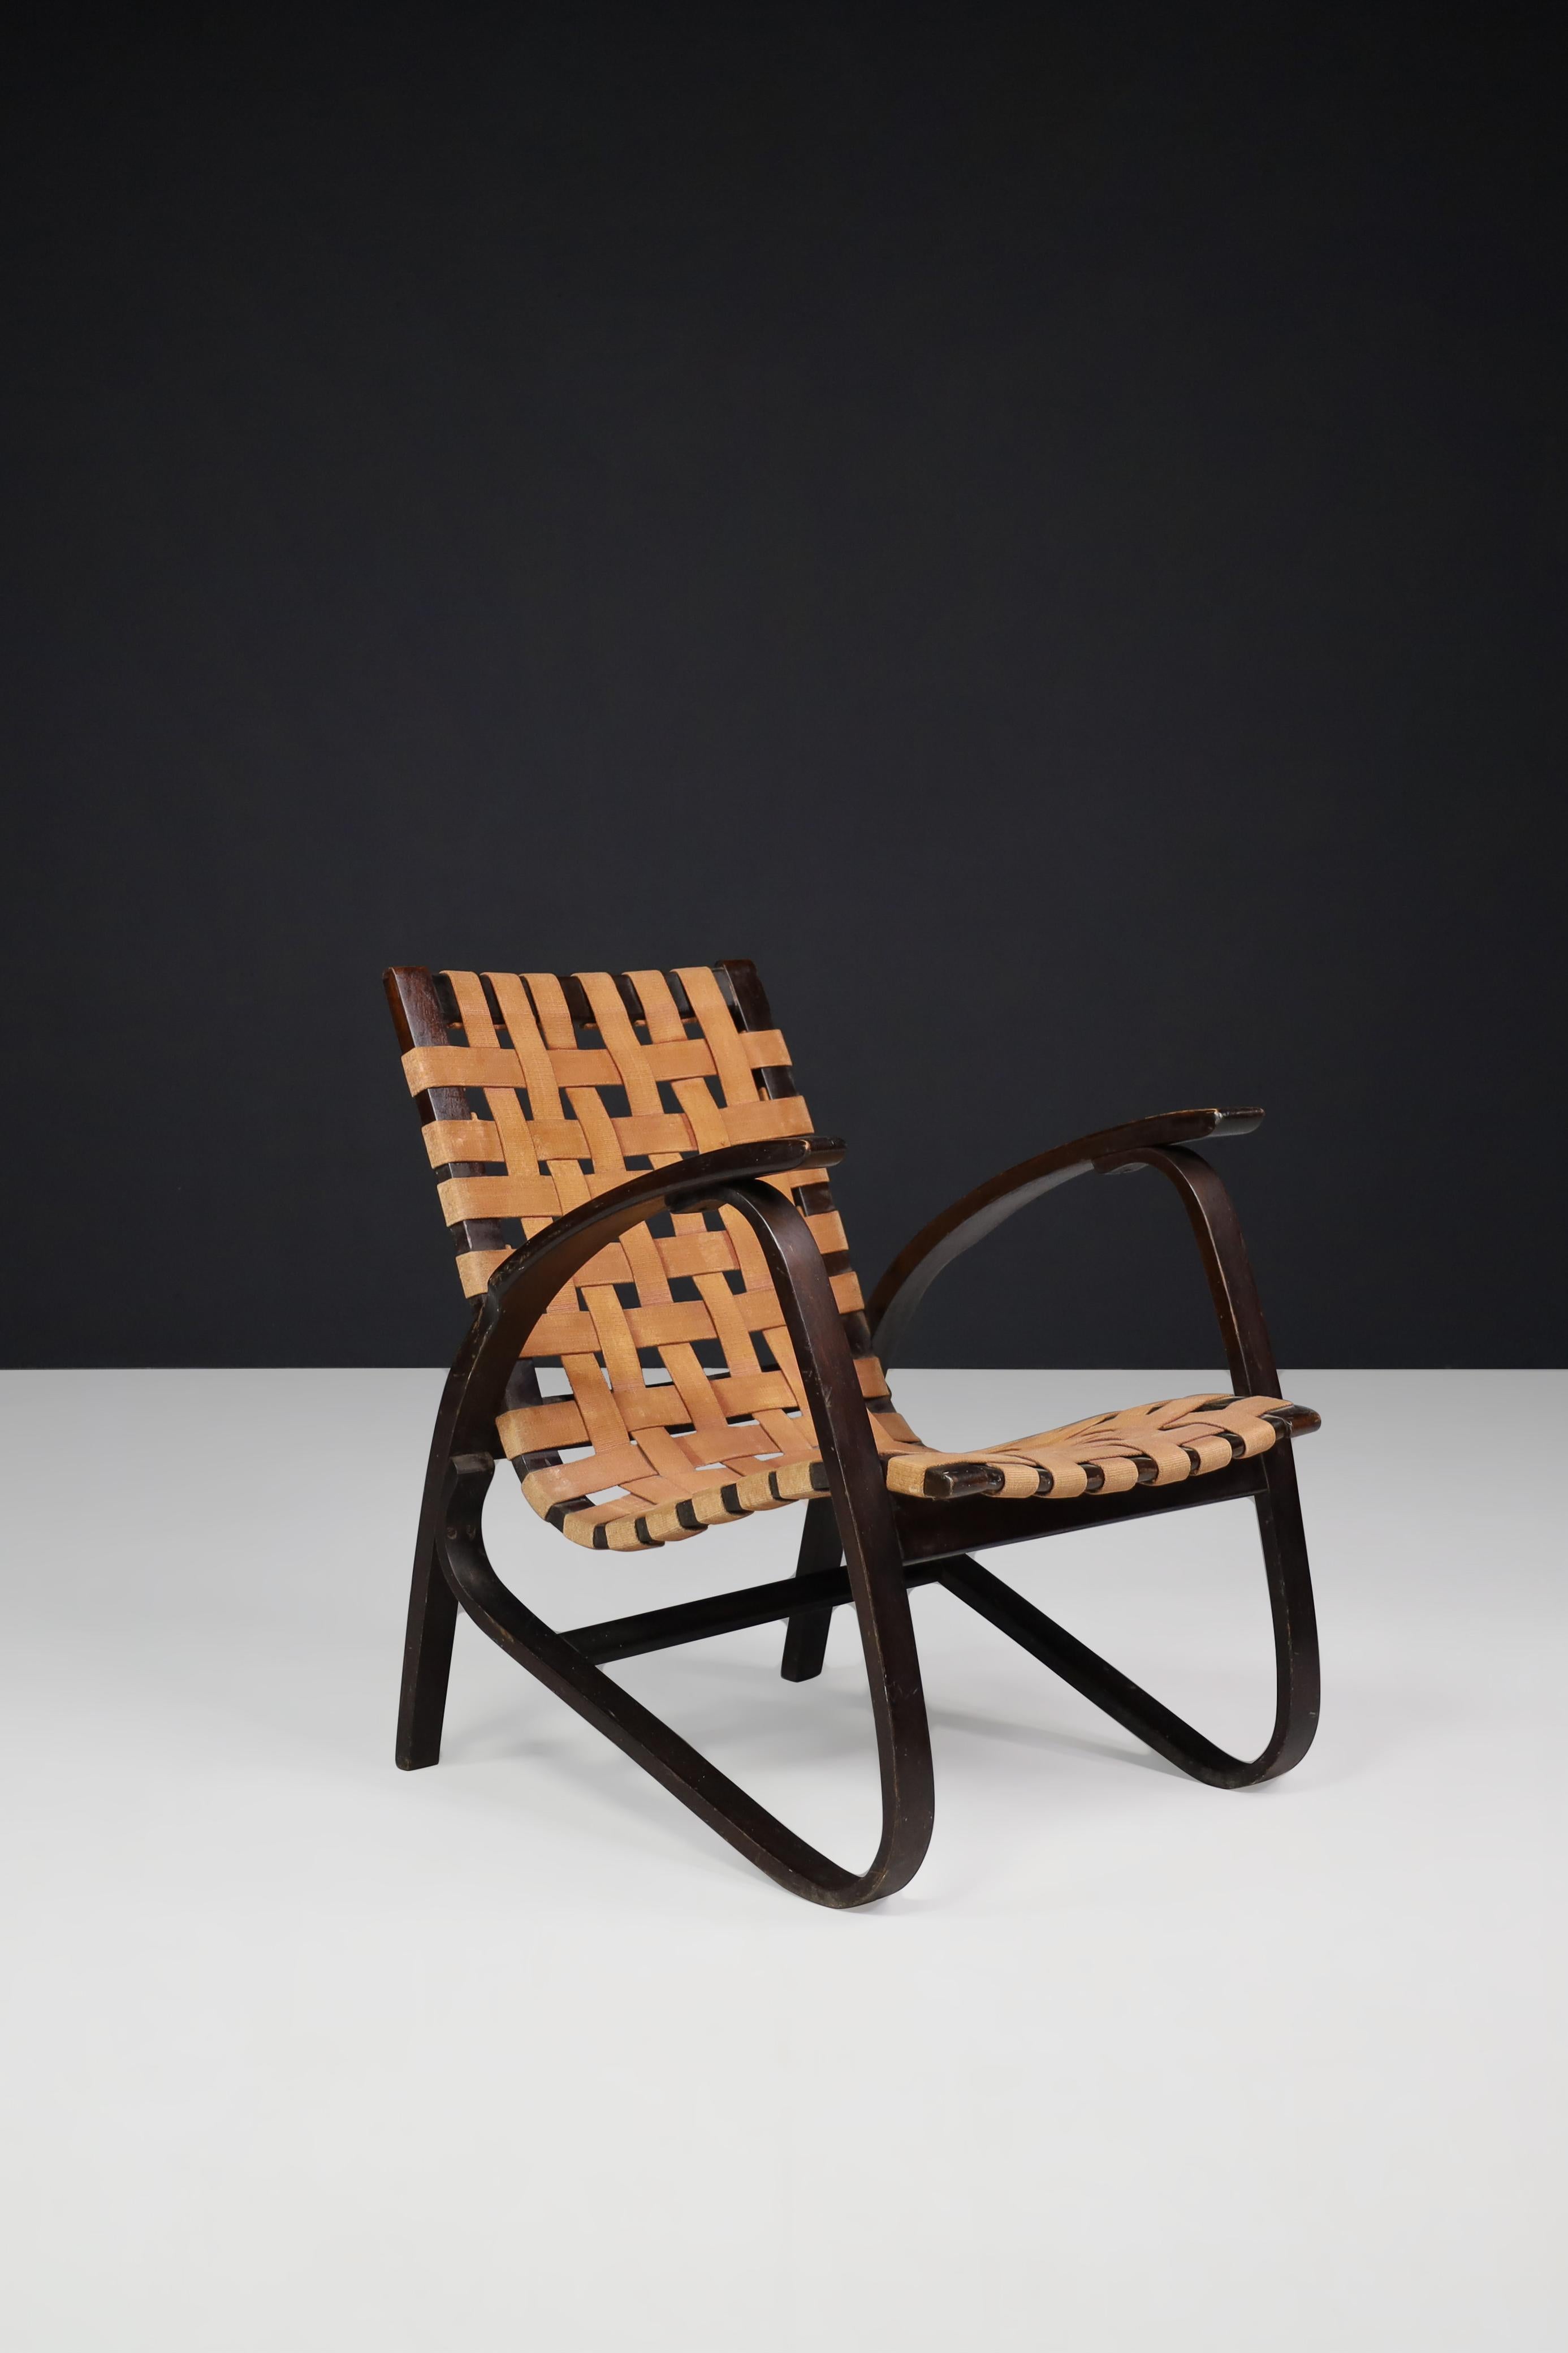 Jan Vanek lounge chair in bentwood and patinated canvas, Praque, 1940s

Bauhaus armchair designed by Czech architect Jan Vanek in the 1940s, who was a contemporary of Jindrich Halabala. This chair are upholstered with a patinated canvas seat and